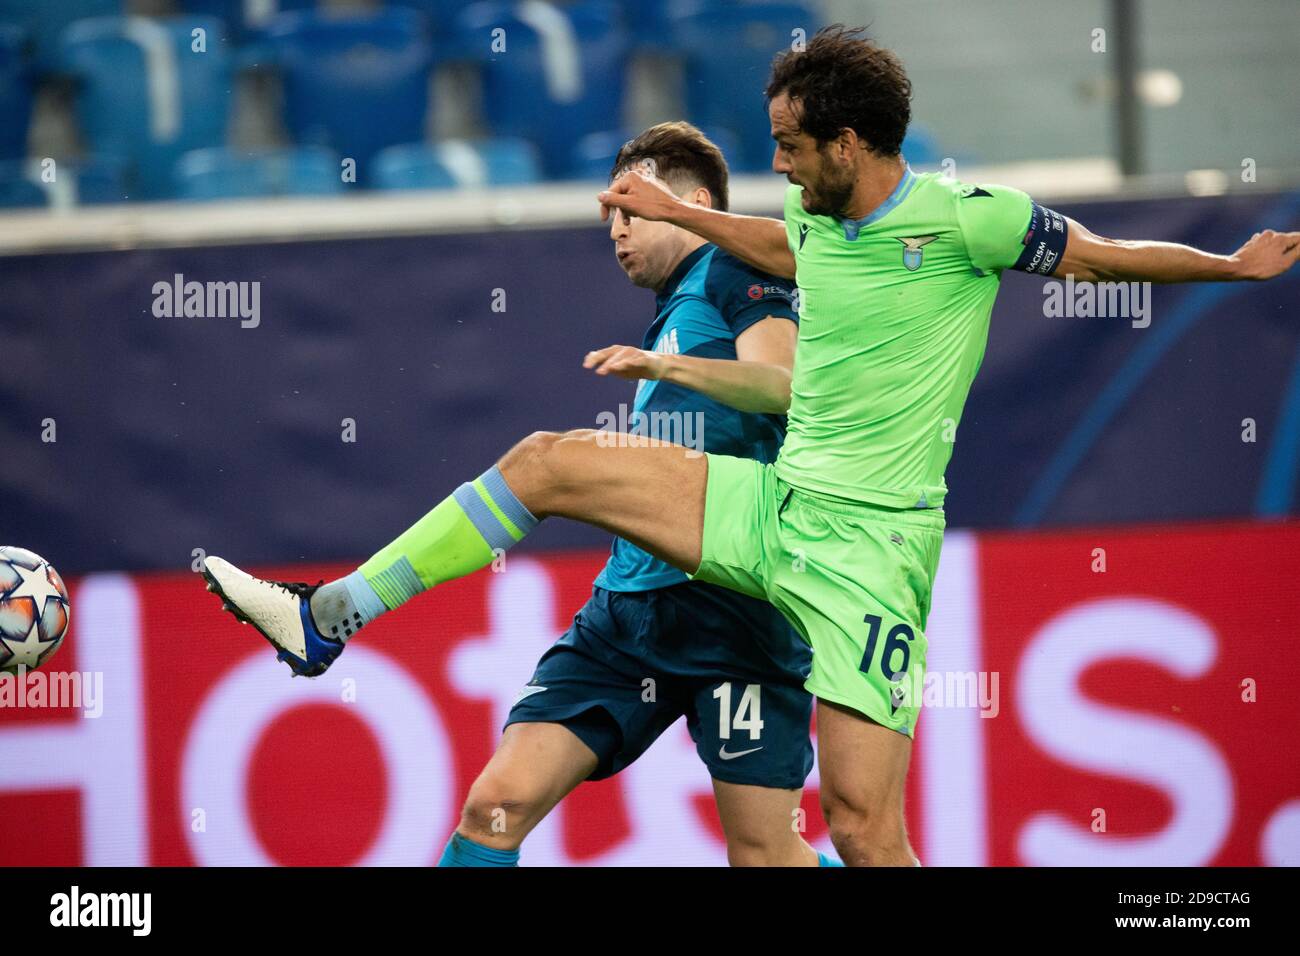 SAINT PETERSBURG, RUSSIA - NOVEMBER 04: Marco Parolo of SS Lazio contests with Daler Kuzyayev of Zenit St Petersburg during the UEFA Champions League Group F stage match between Zenit St. Petersburg and SS Lazio at Gazprom Arena on November 4, 2020 in Saint Petersburg, Russia. (Photo by MB Media) Stock Photo